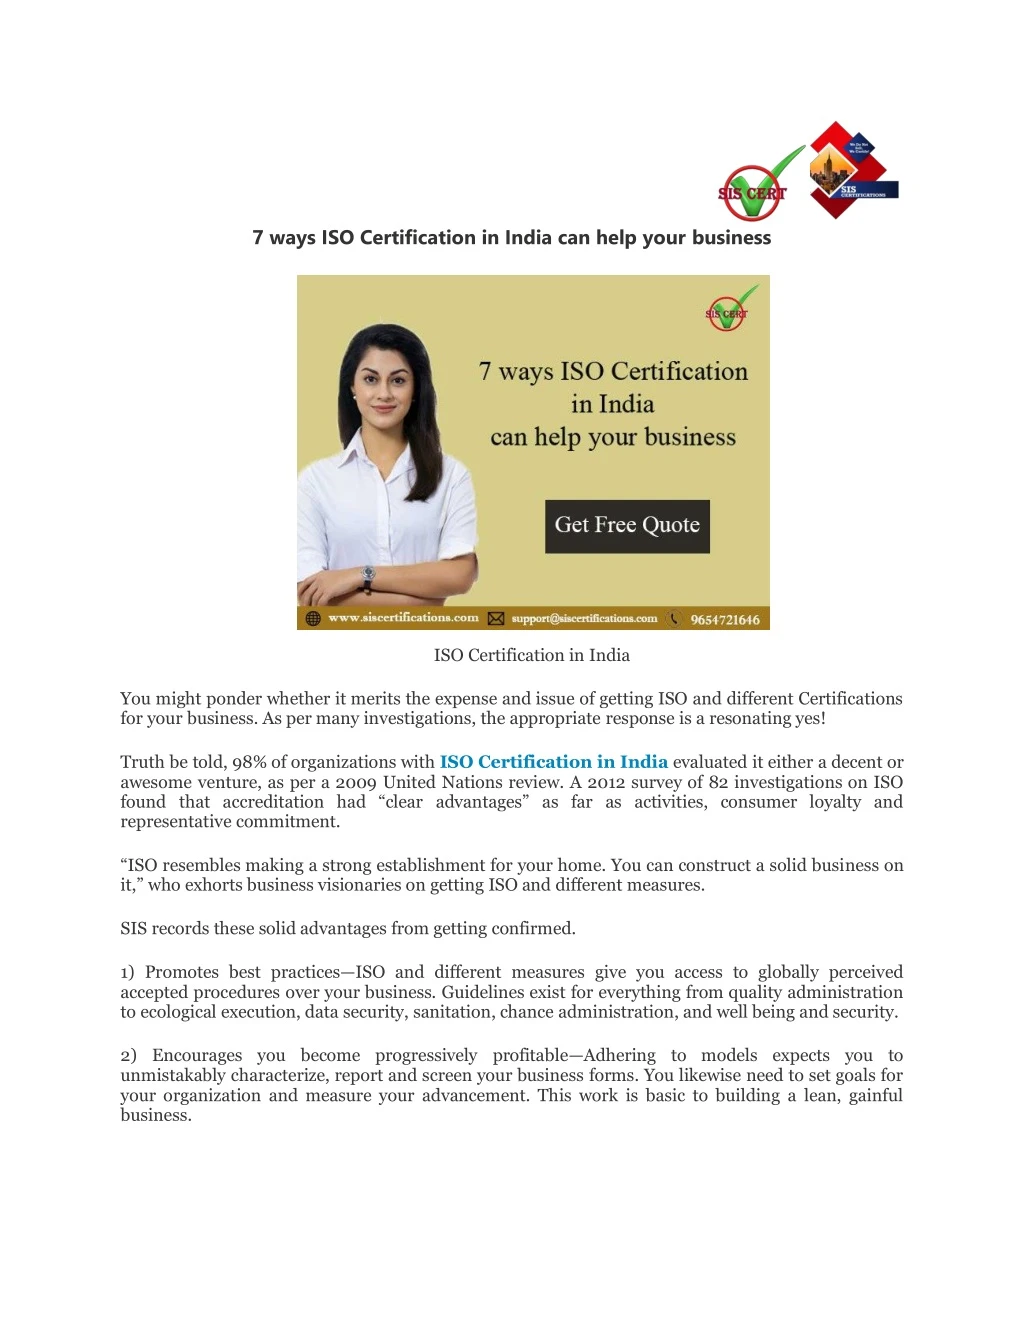 7 ways iso certification in india can help your